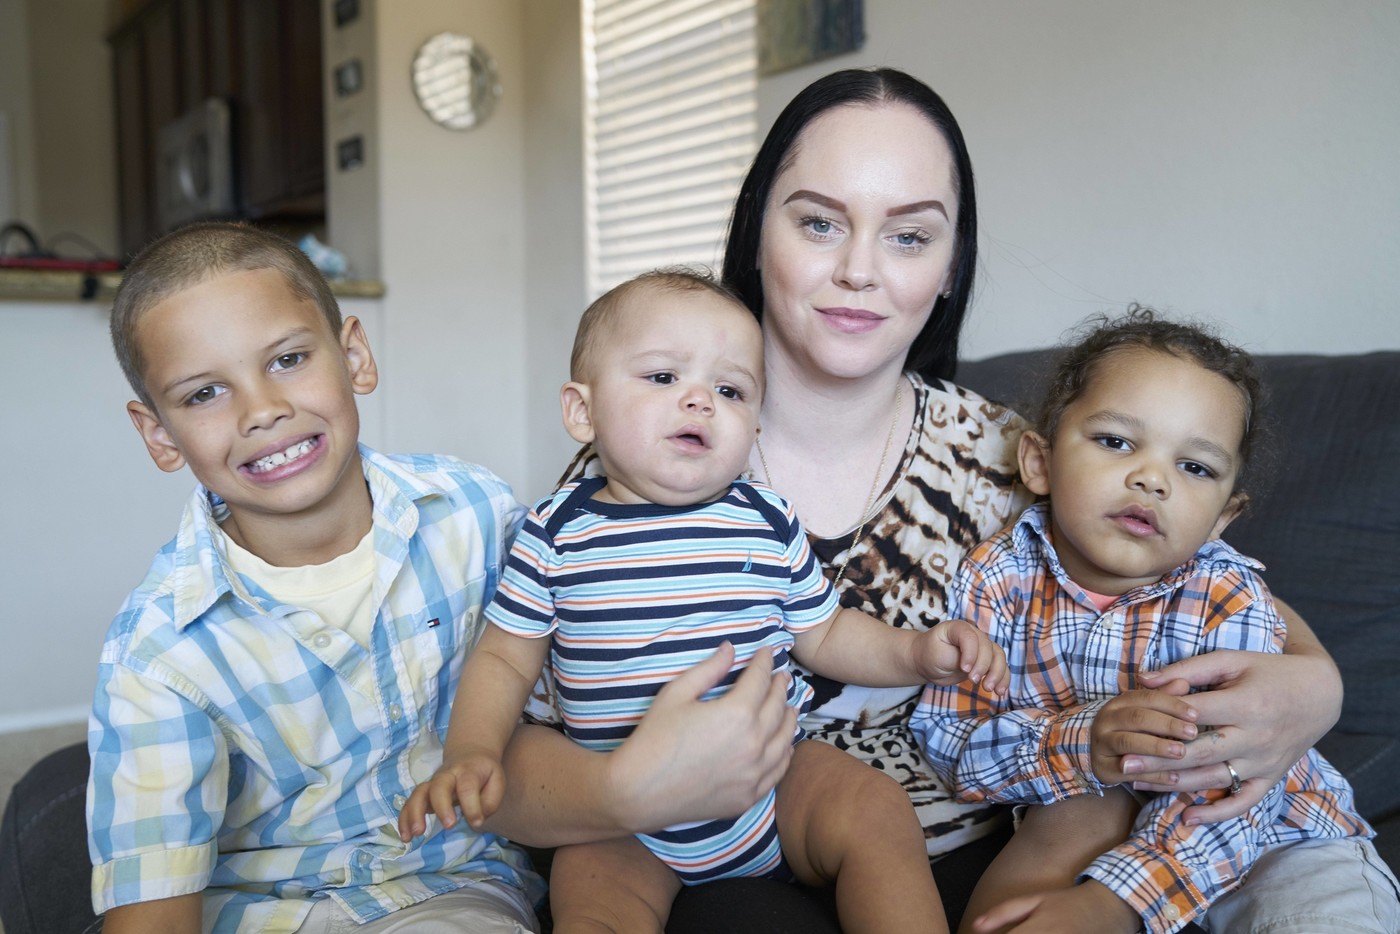 EXCLUSIVE: ** NO NY DAILY PAPERS** Surrogate mother, Jessica Allen who gave birth to twins for a Chinese couple. In a rare phenomenon one of the twins was biologically her's.